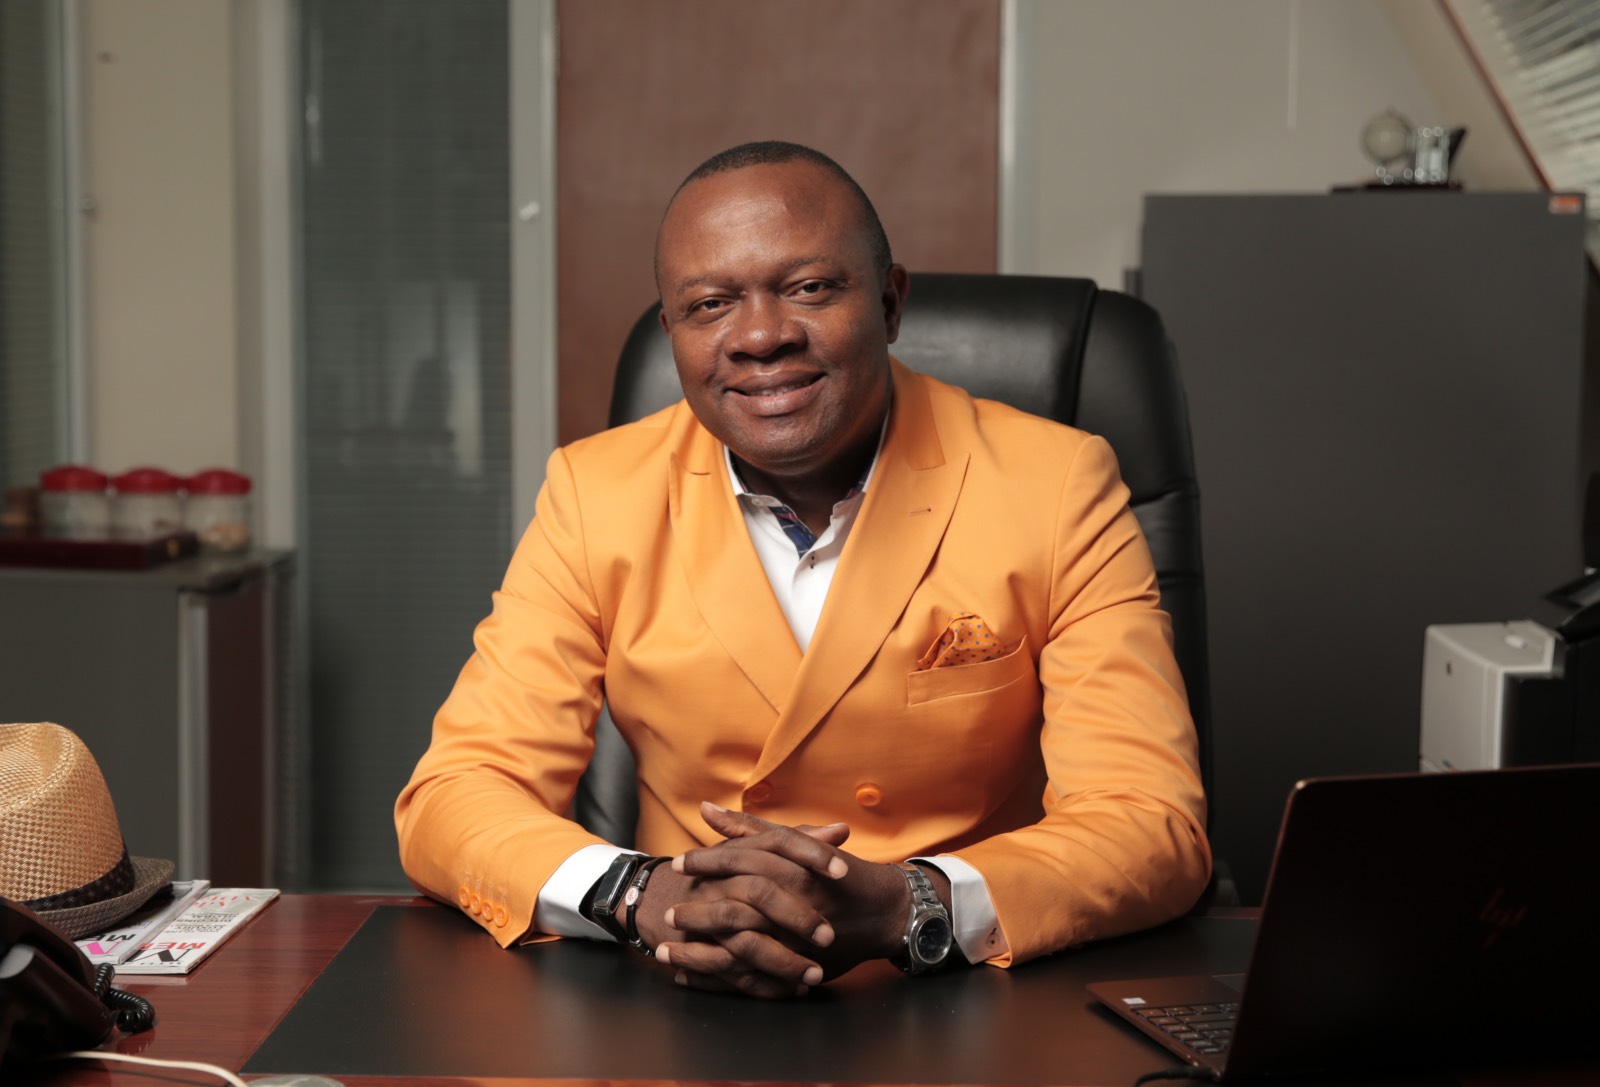 Valentine Ozigbo, immediate past President and Group CEO of Transcorp Plc